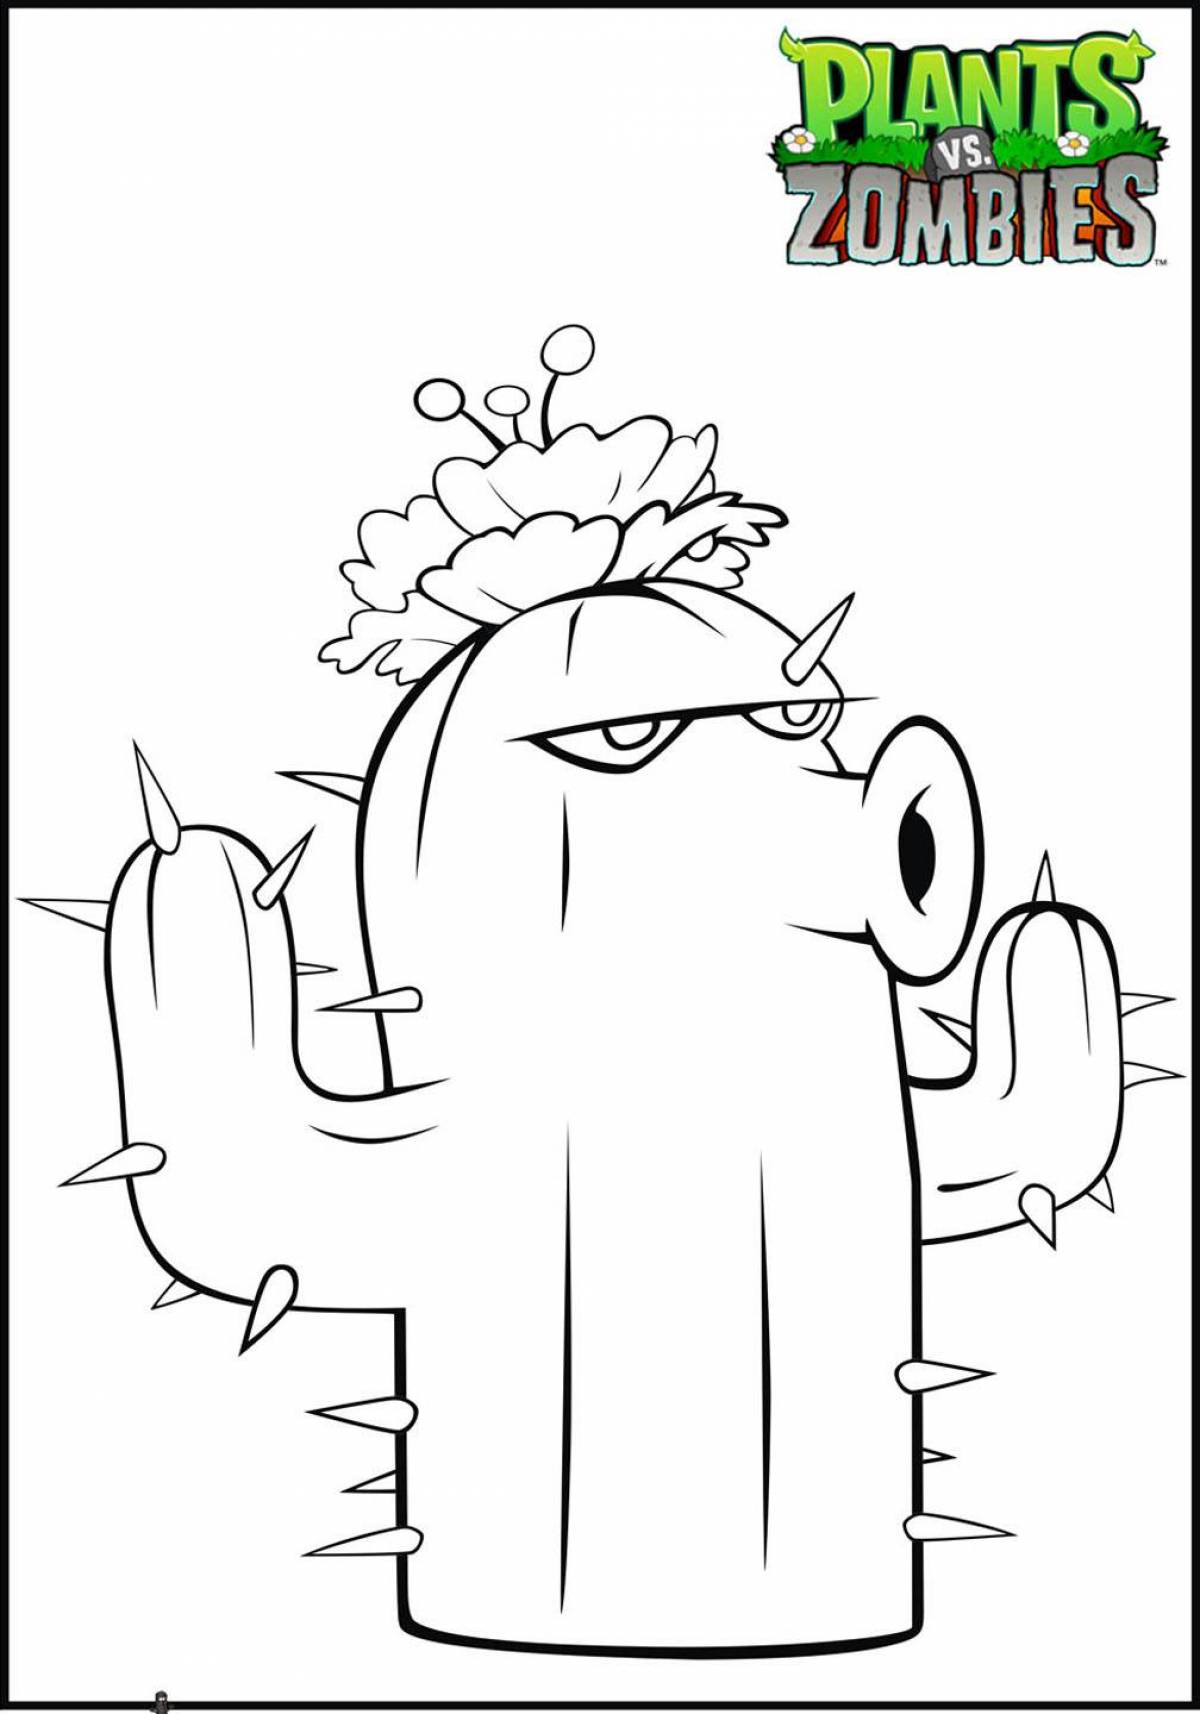 Colorful colorful plants vs zombies coloring book